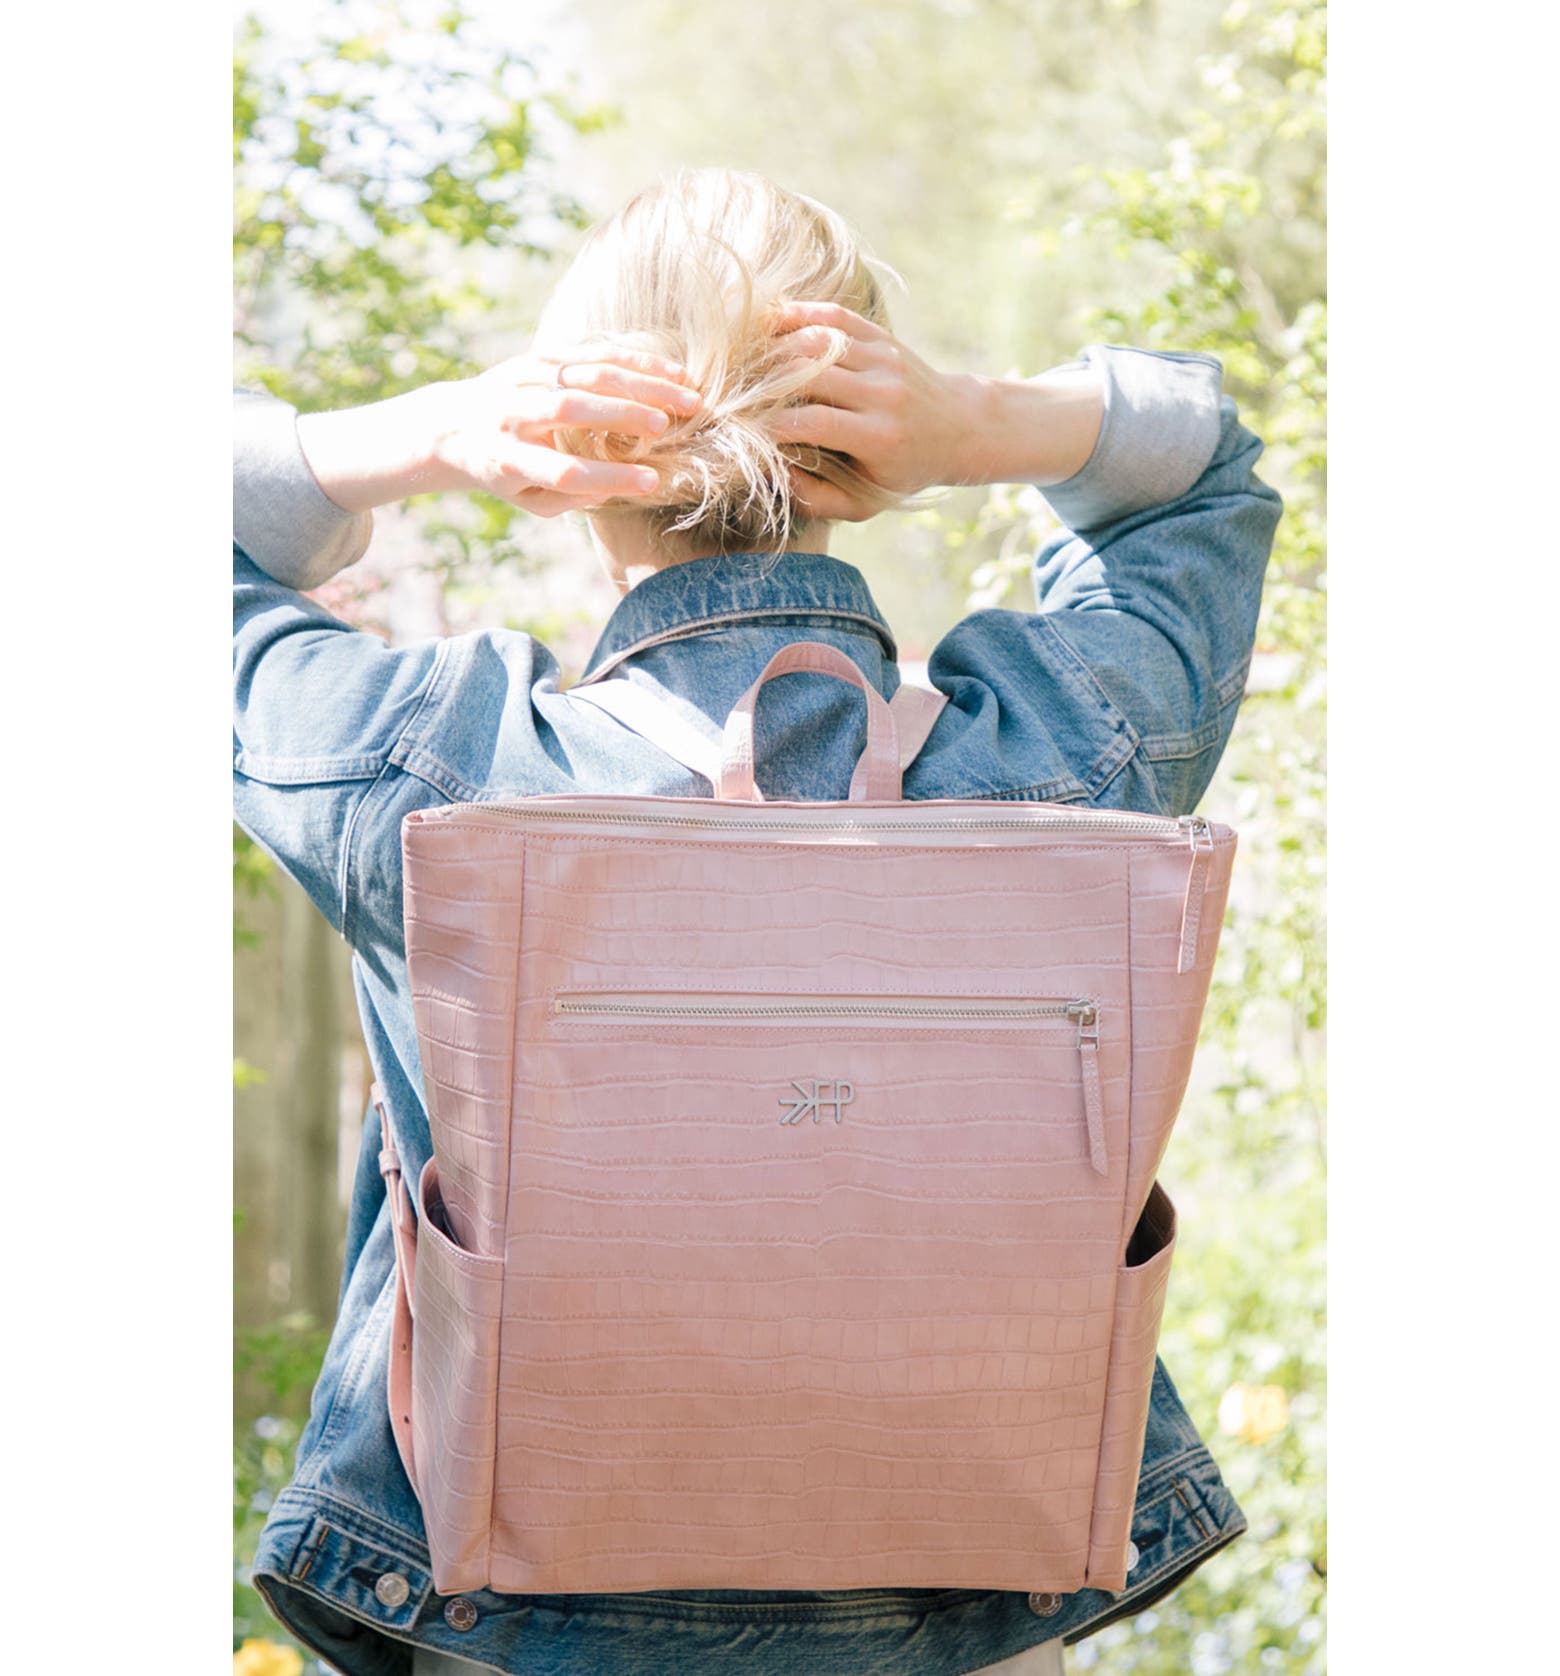 The 11 Best Bags for Moms in 2022 – PureWow